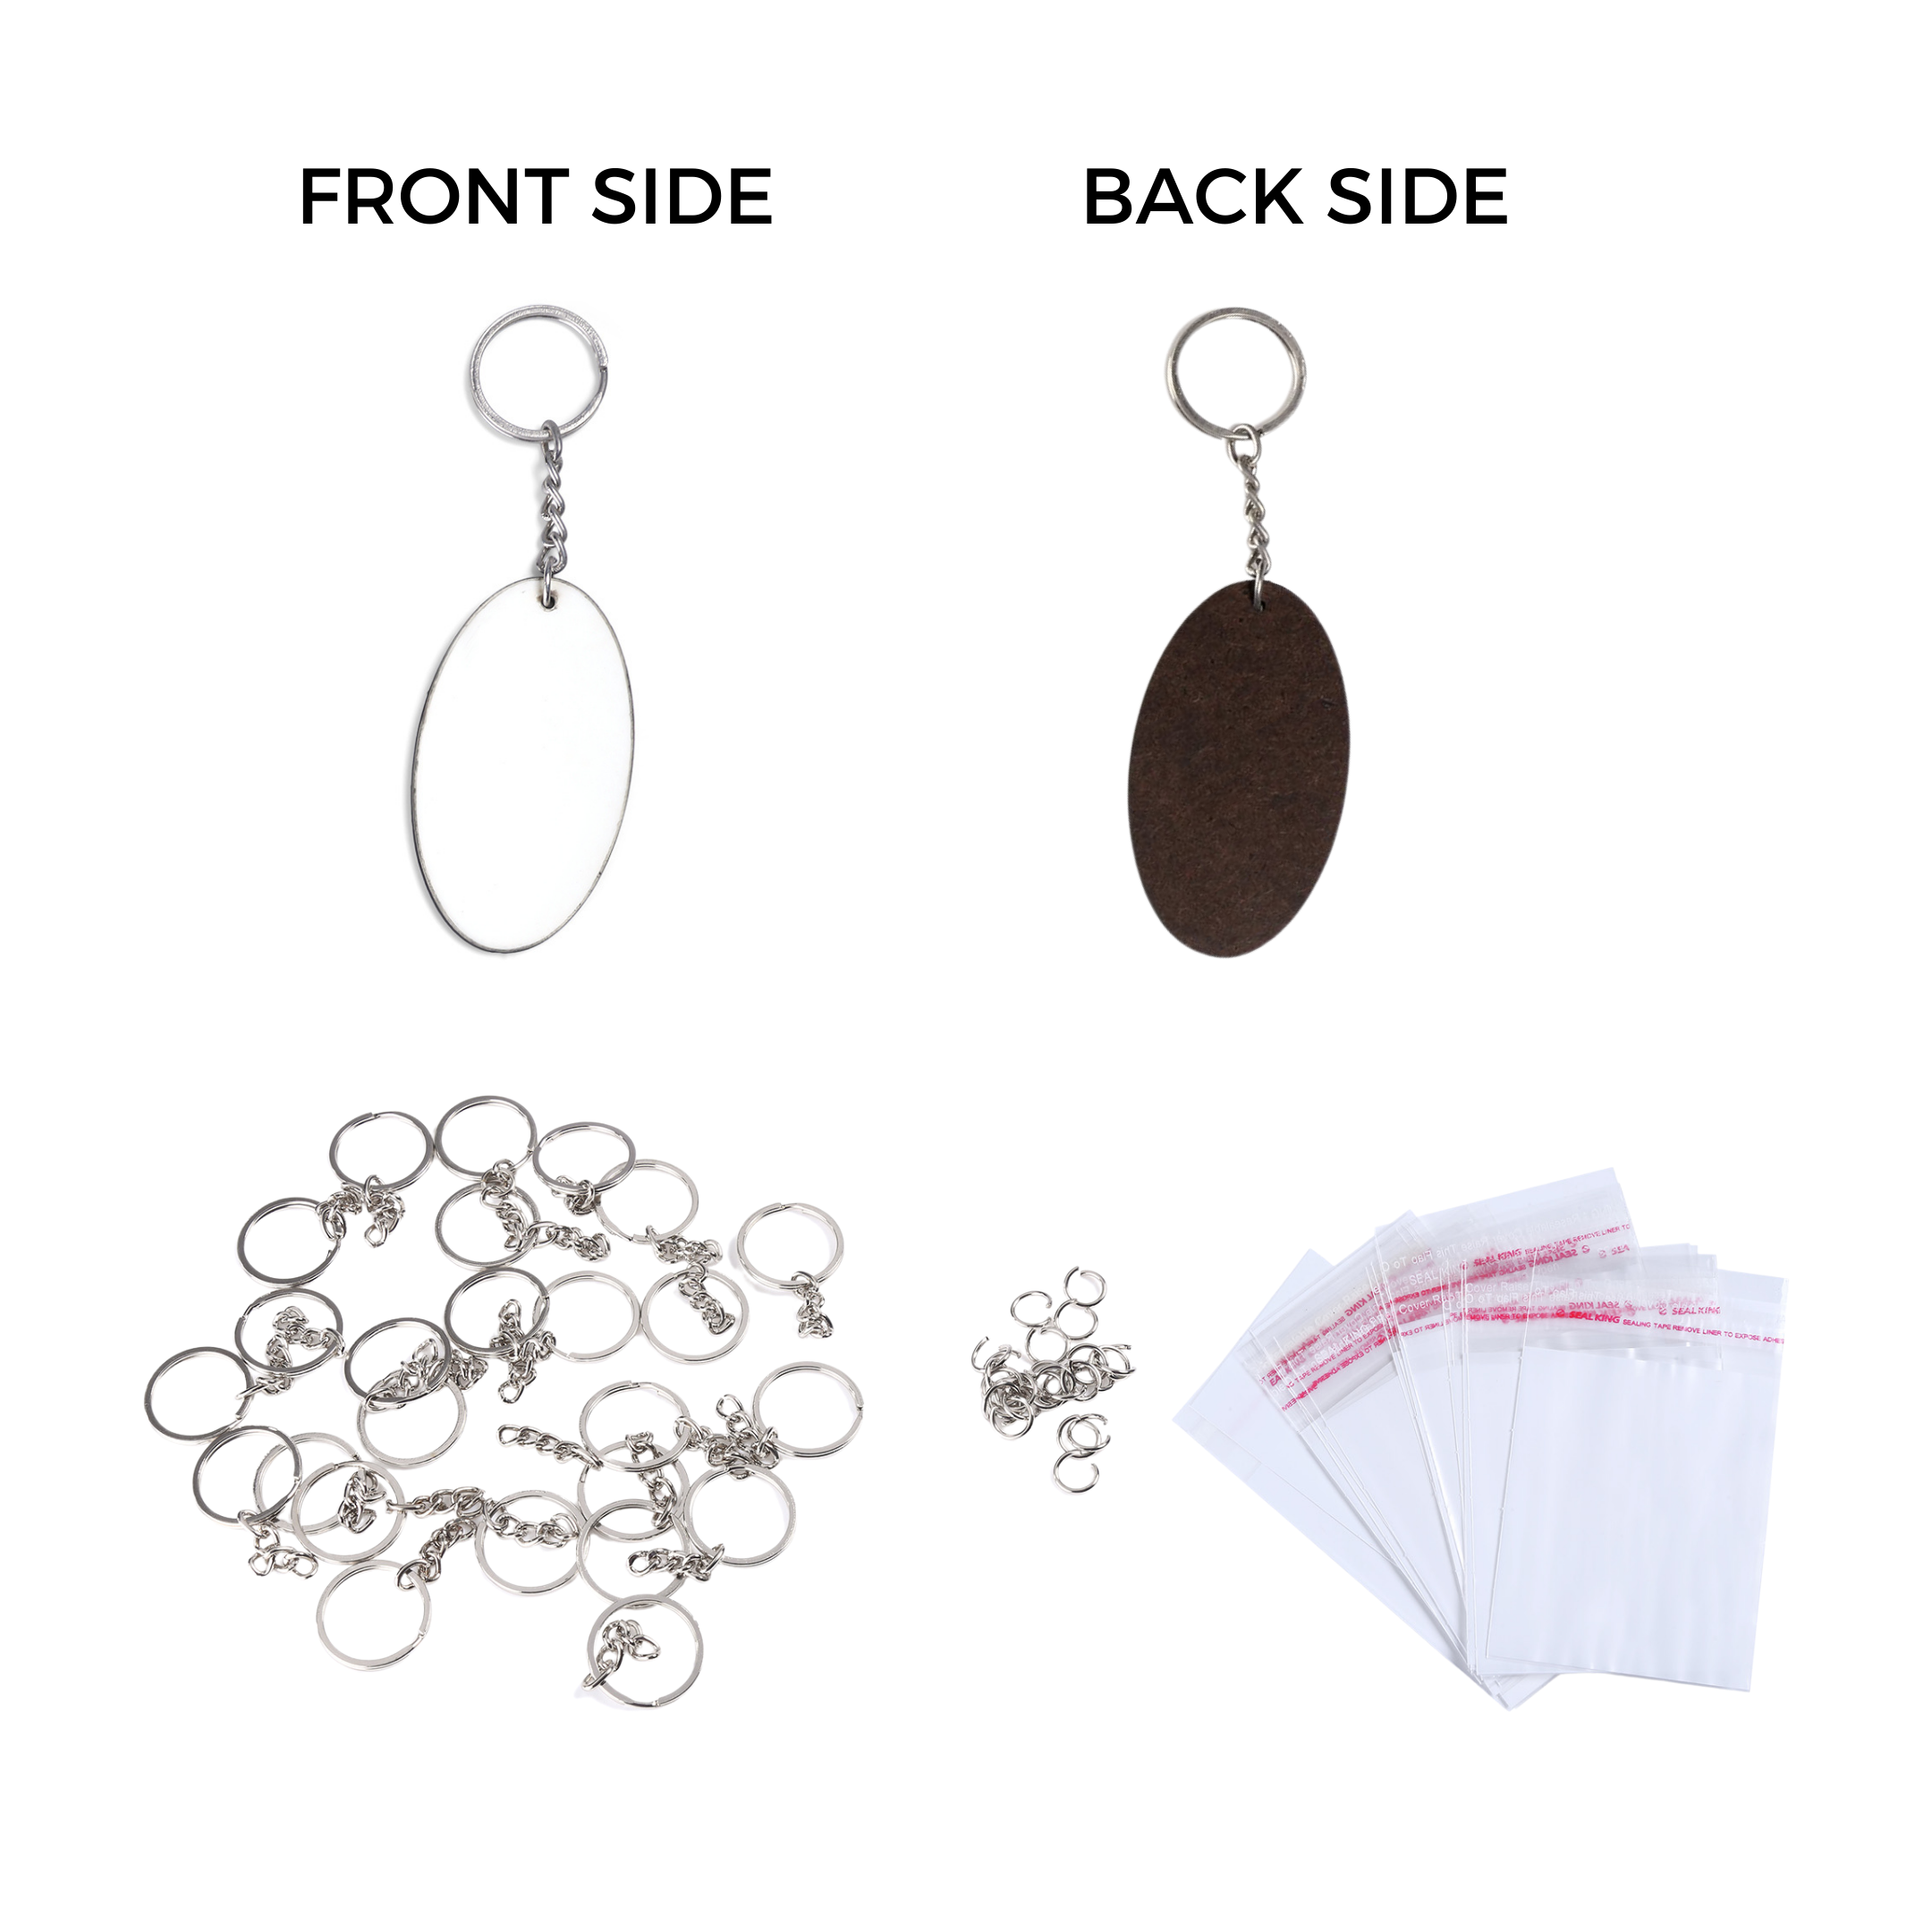 Yorkker Sublimation Blank Keychain Pack of 25 pcs Oval Shapes